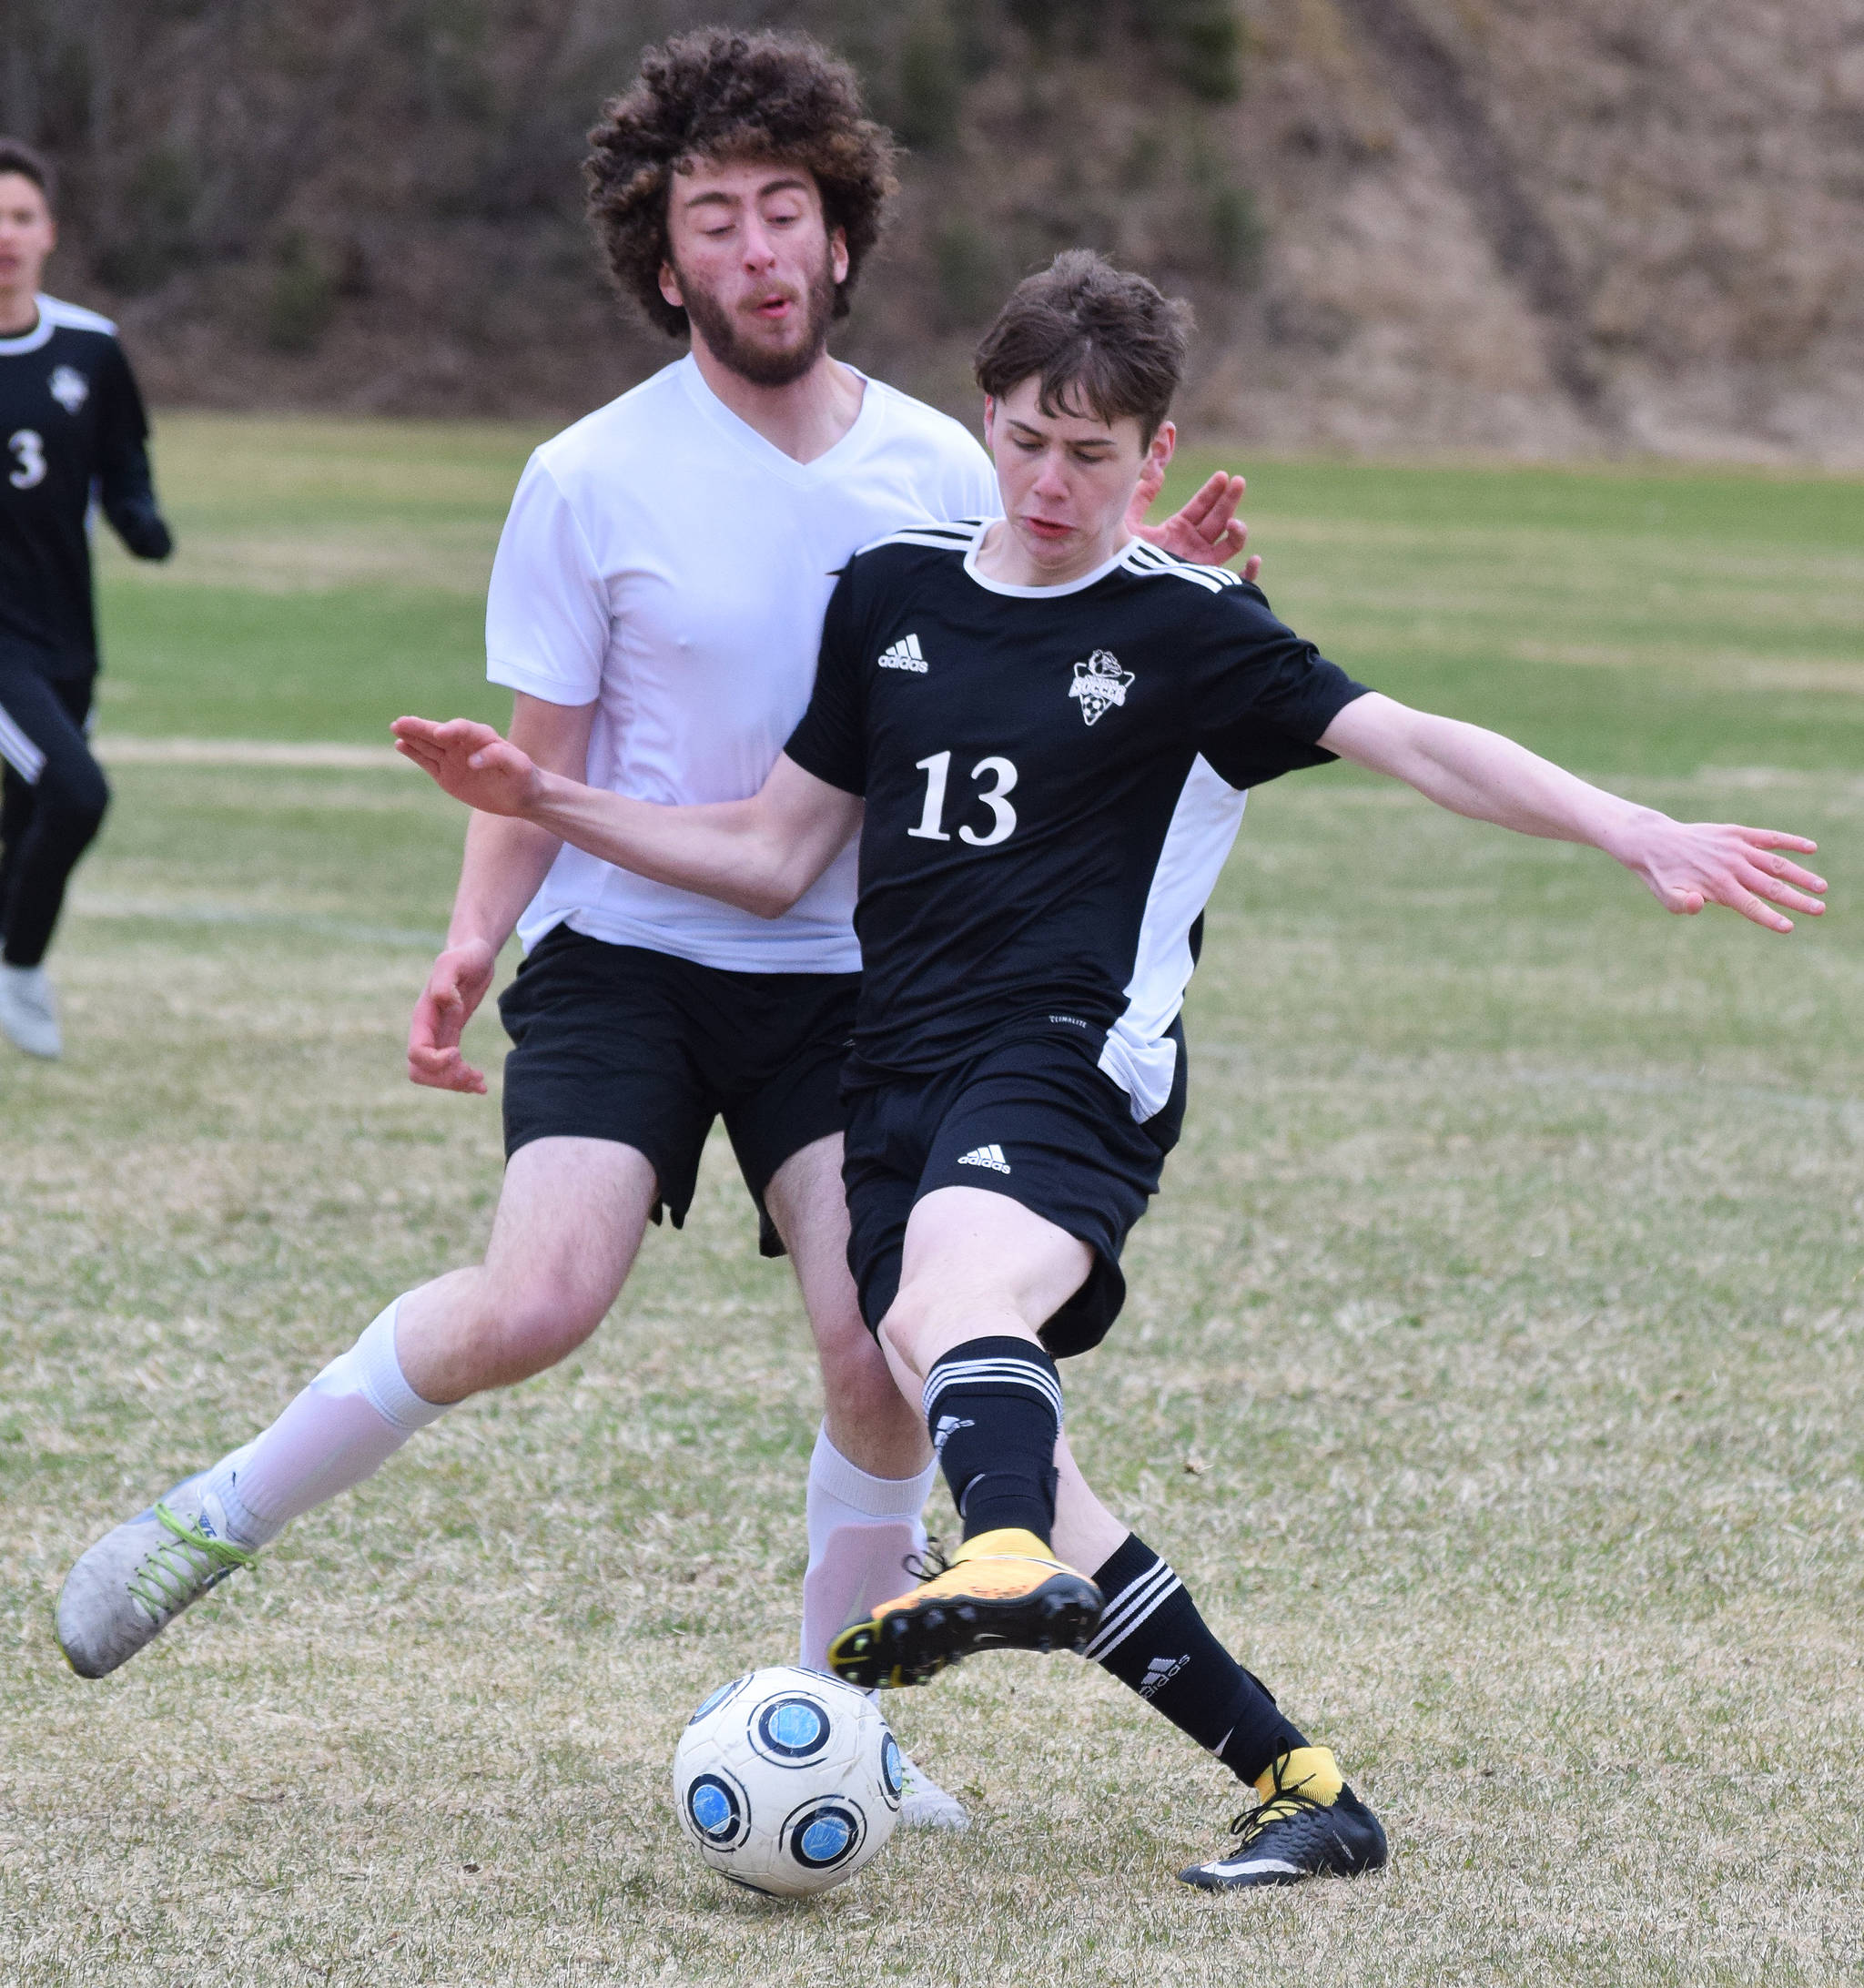 Nikiski’s Isaiah Gray (13) battles for the ball with a Houston defender Friday, May 10, 2019, in a nonconference game in Nikiski, Alaska. (Photo by Joey Klecka/Peninsula Clarion)